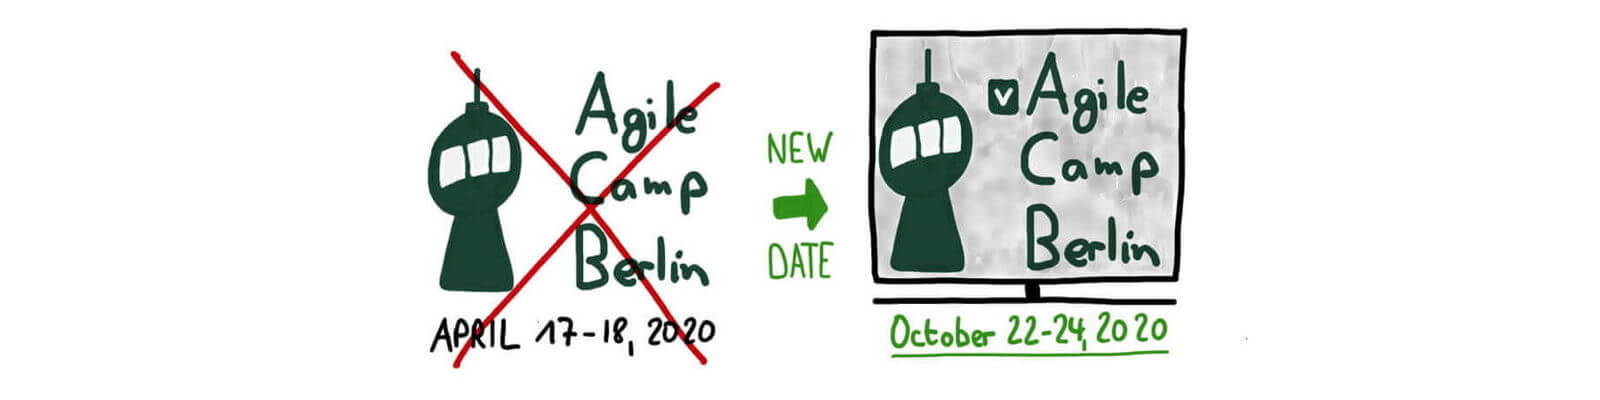 Virtual Agile Camp Berlin 2020: Schedule, Session Proposals, Technology, and Workshops